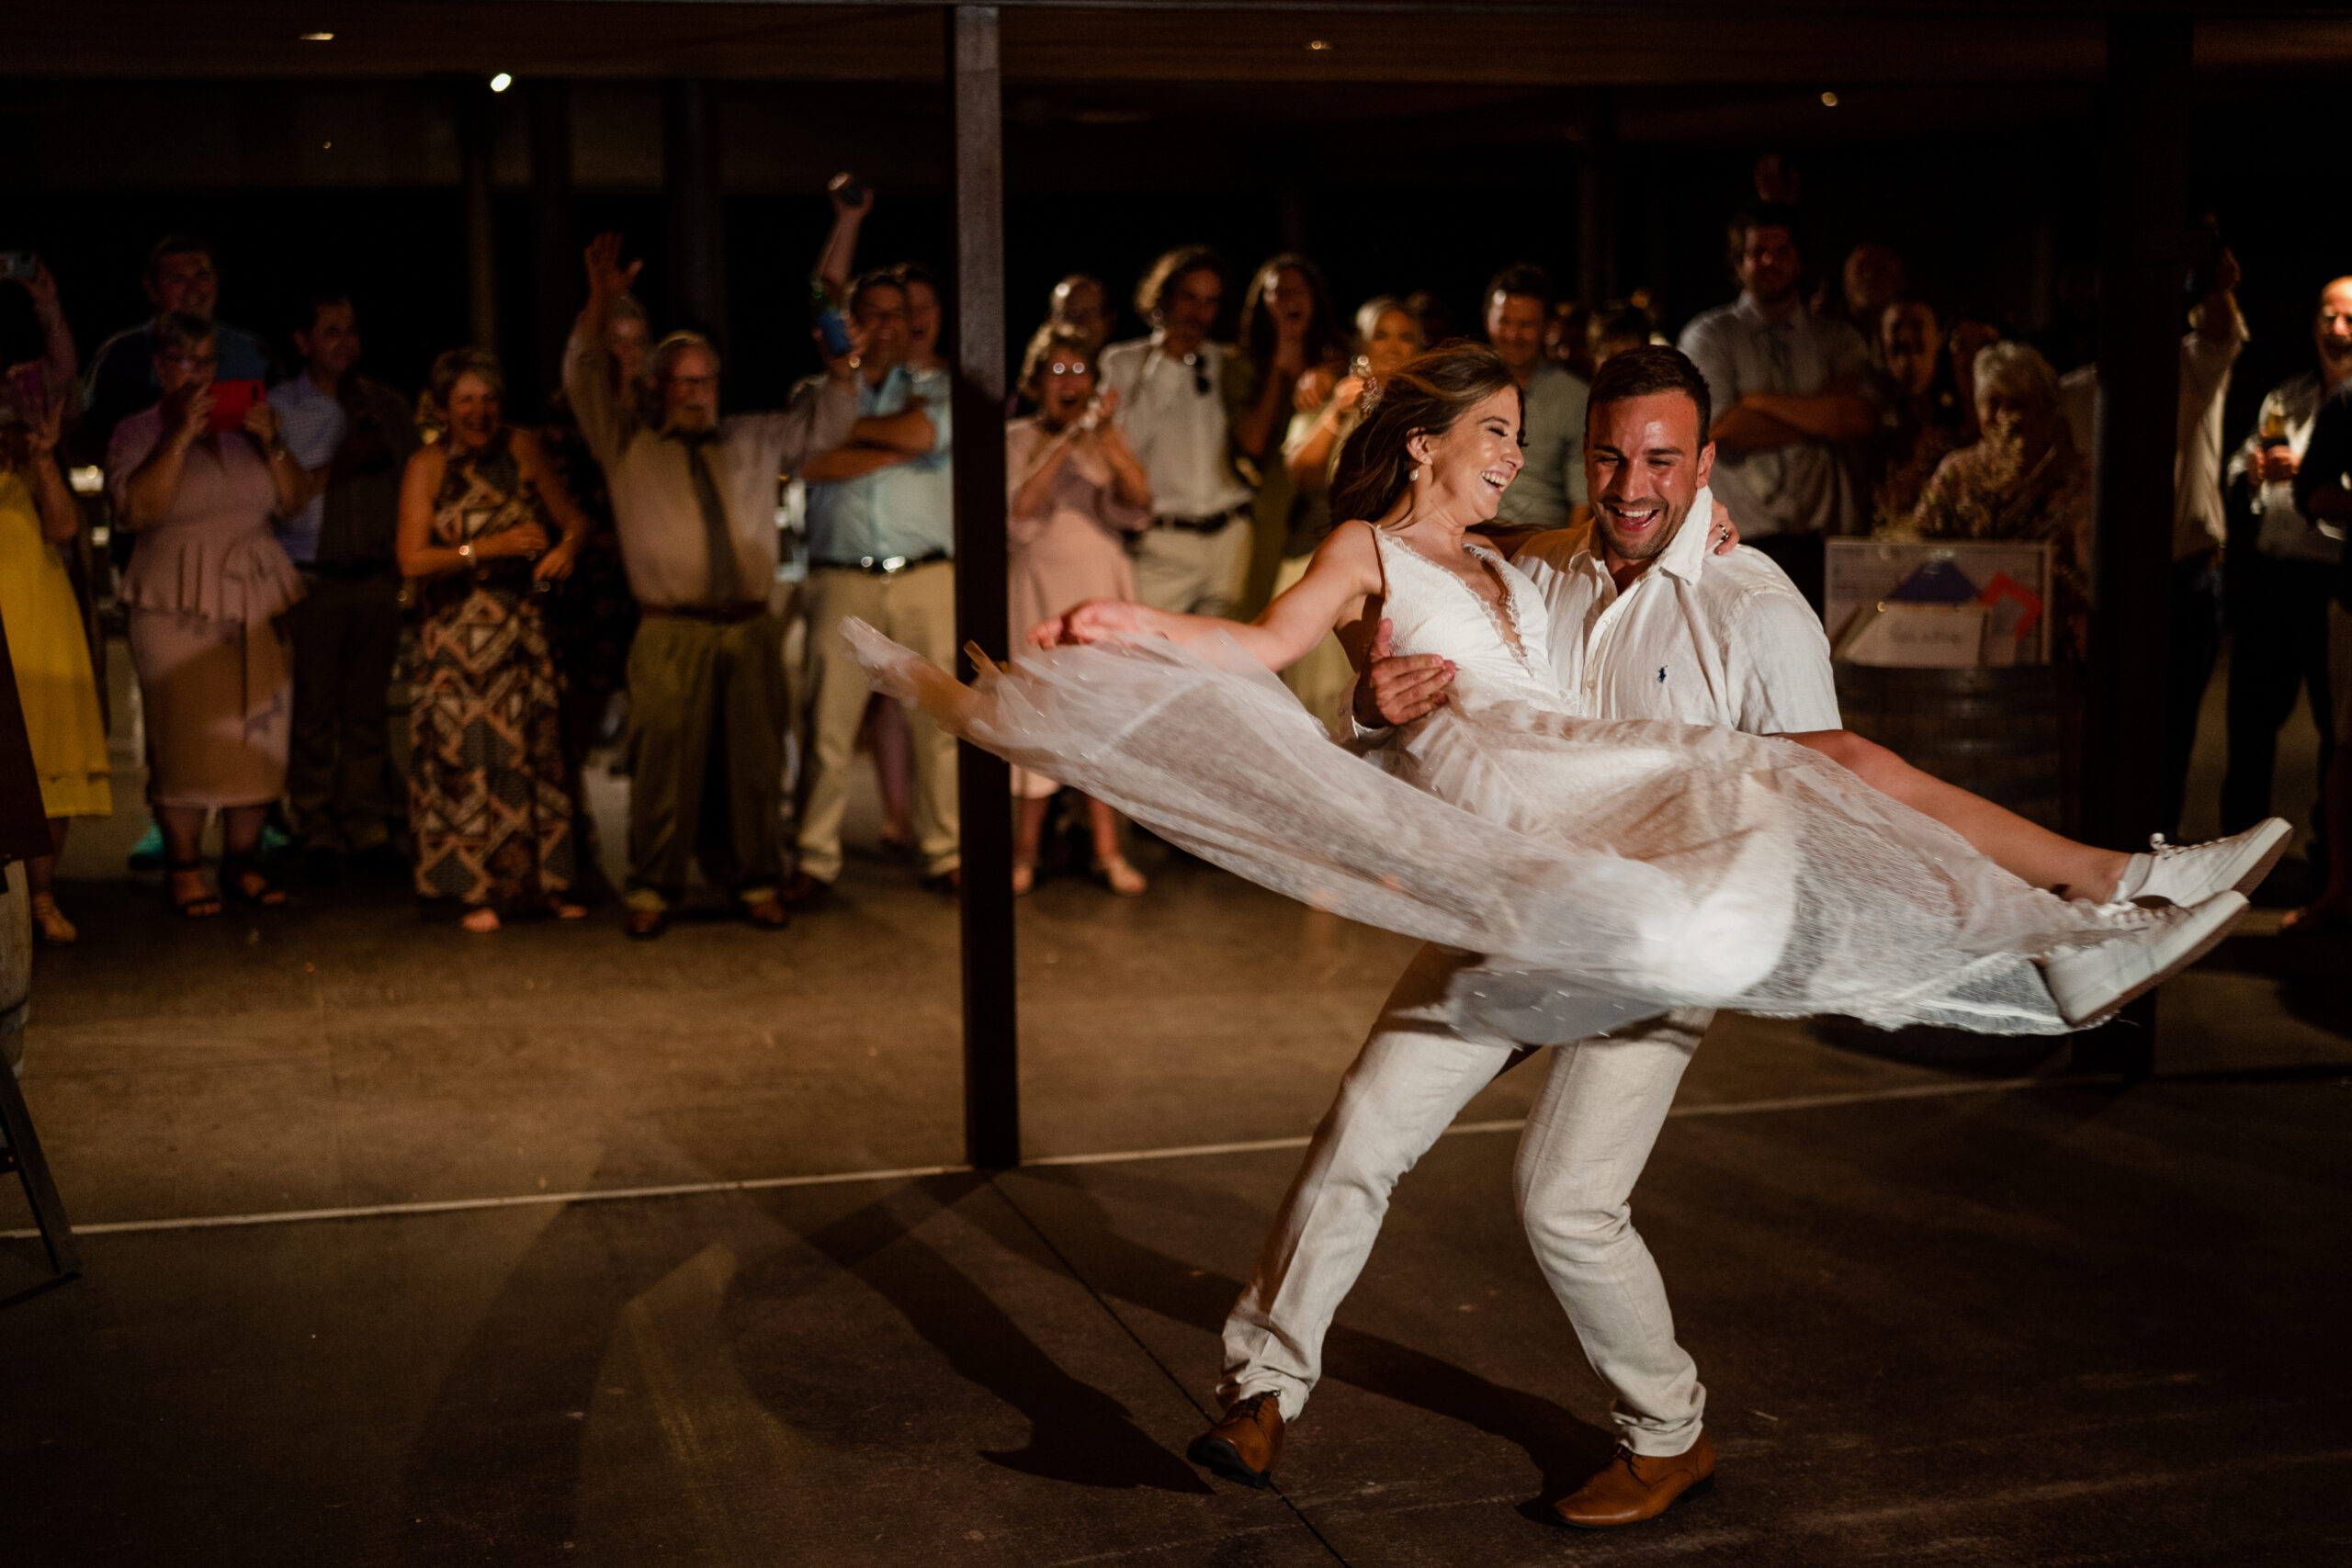 The first dance, choreographed by the bride and groom, with a mashup mix of songs, by DJ and close friend Nathan Weaver.